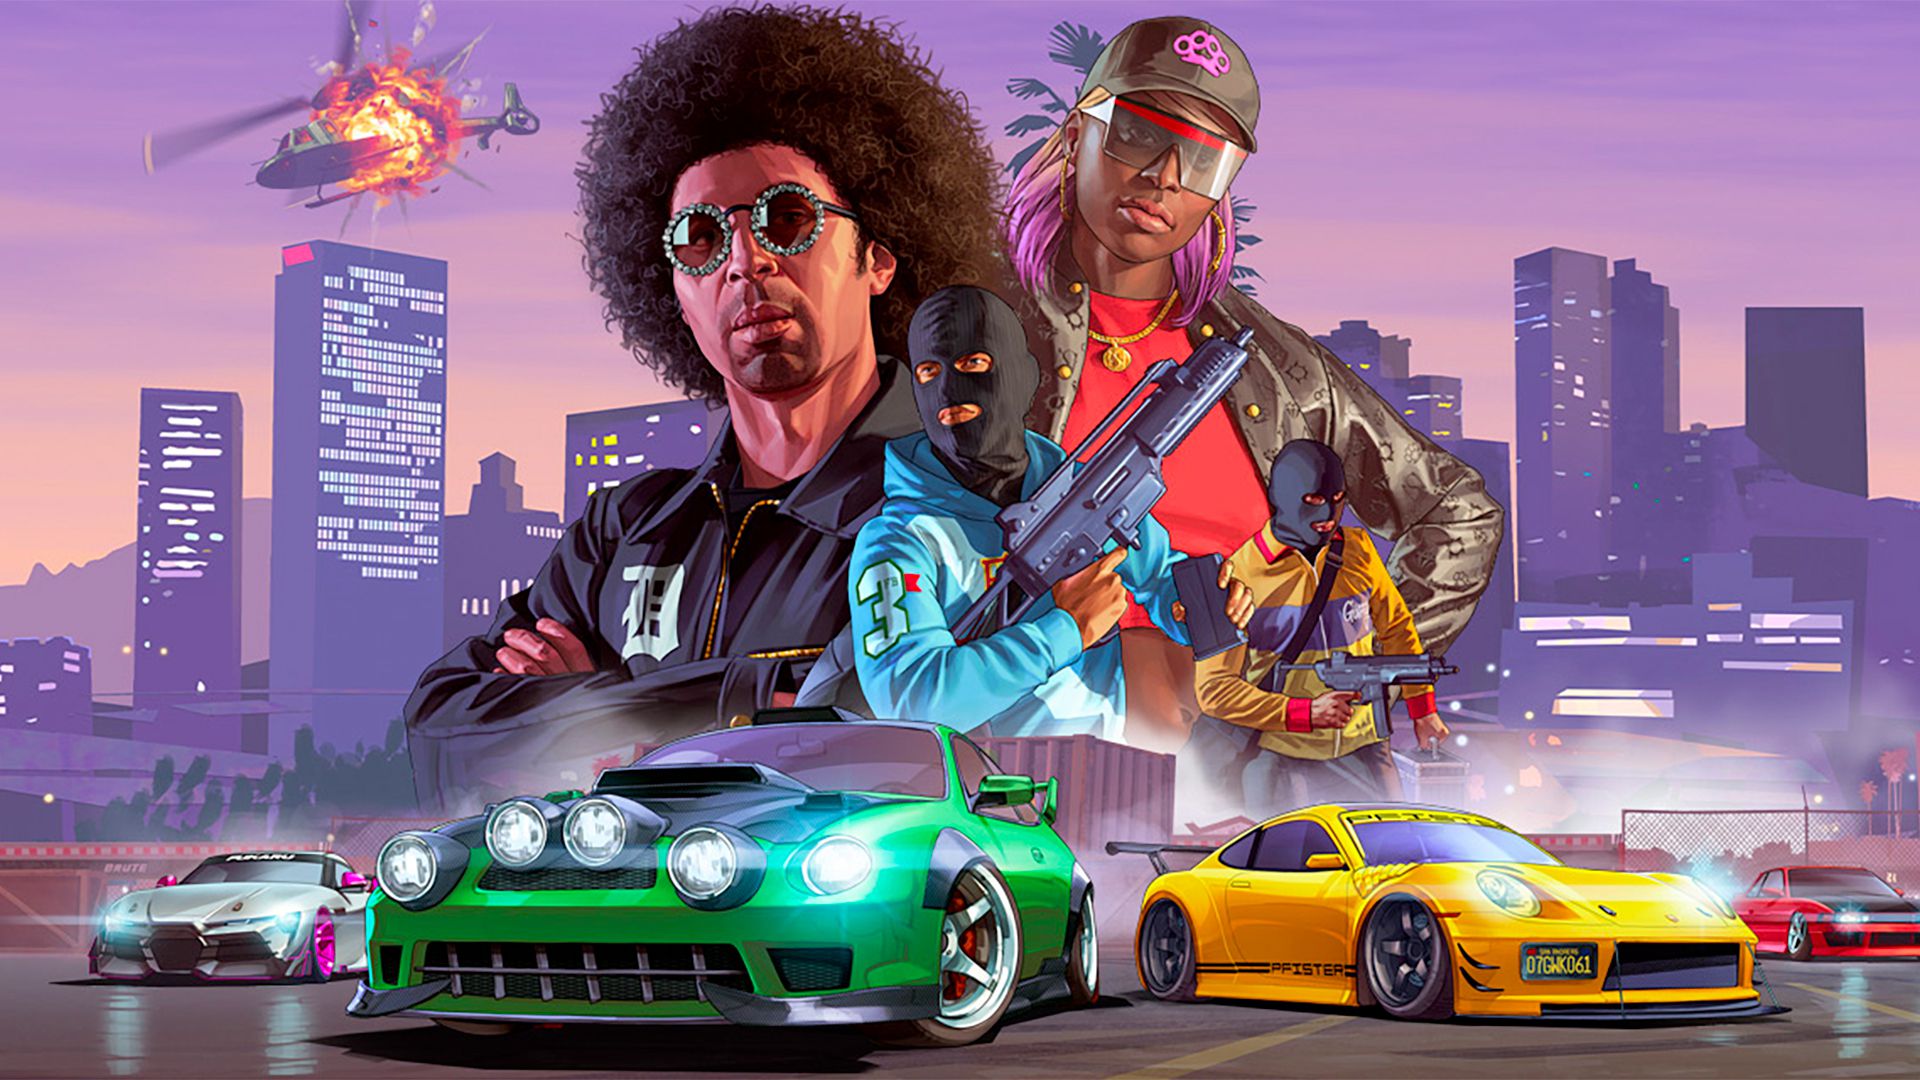 what happens to gta online when gta 6 comes out?